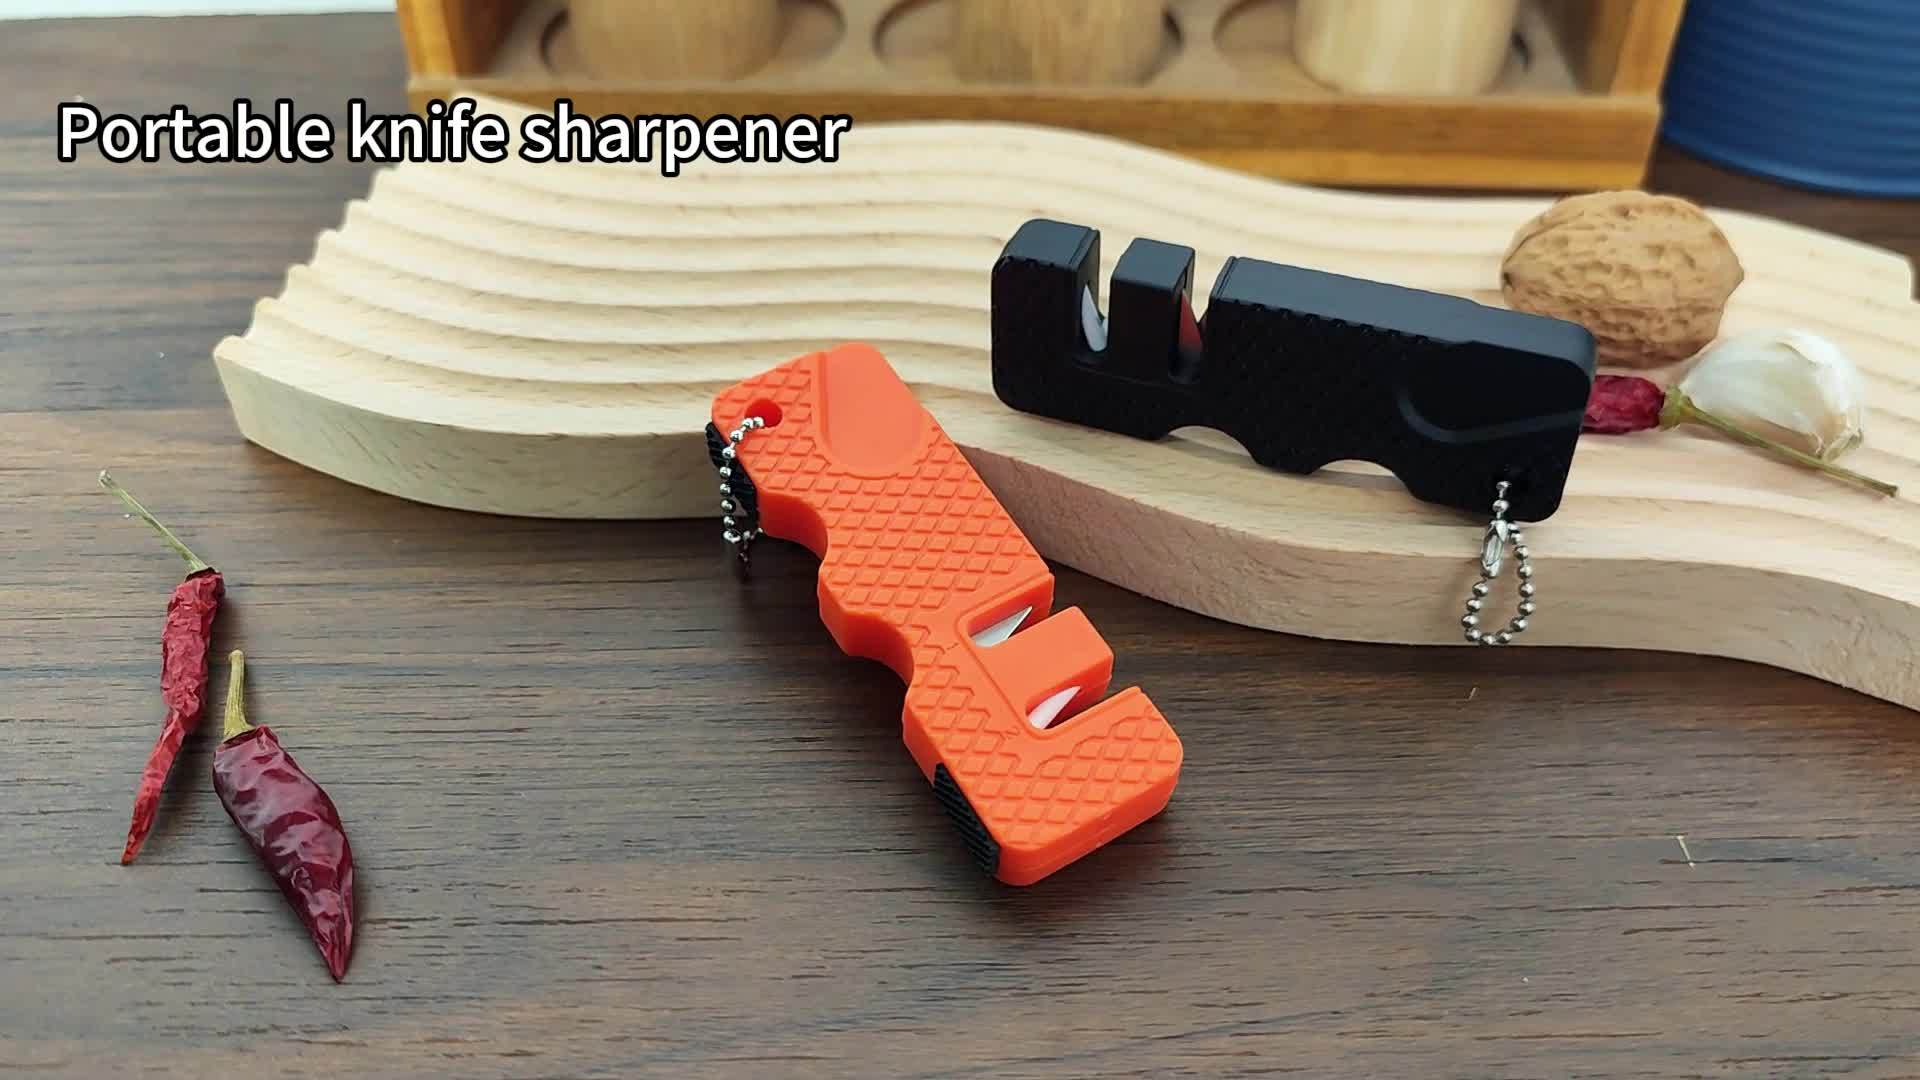 Mini Knife Sharpener Portable for Pocket Knife Small Knife Sharpeners Smart  with Suction Base for Kitchen Workshop Craft Hiking - AliExpress